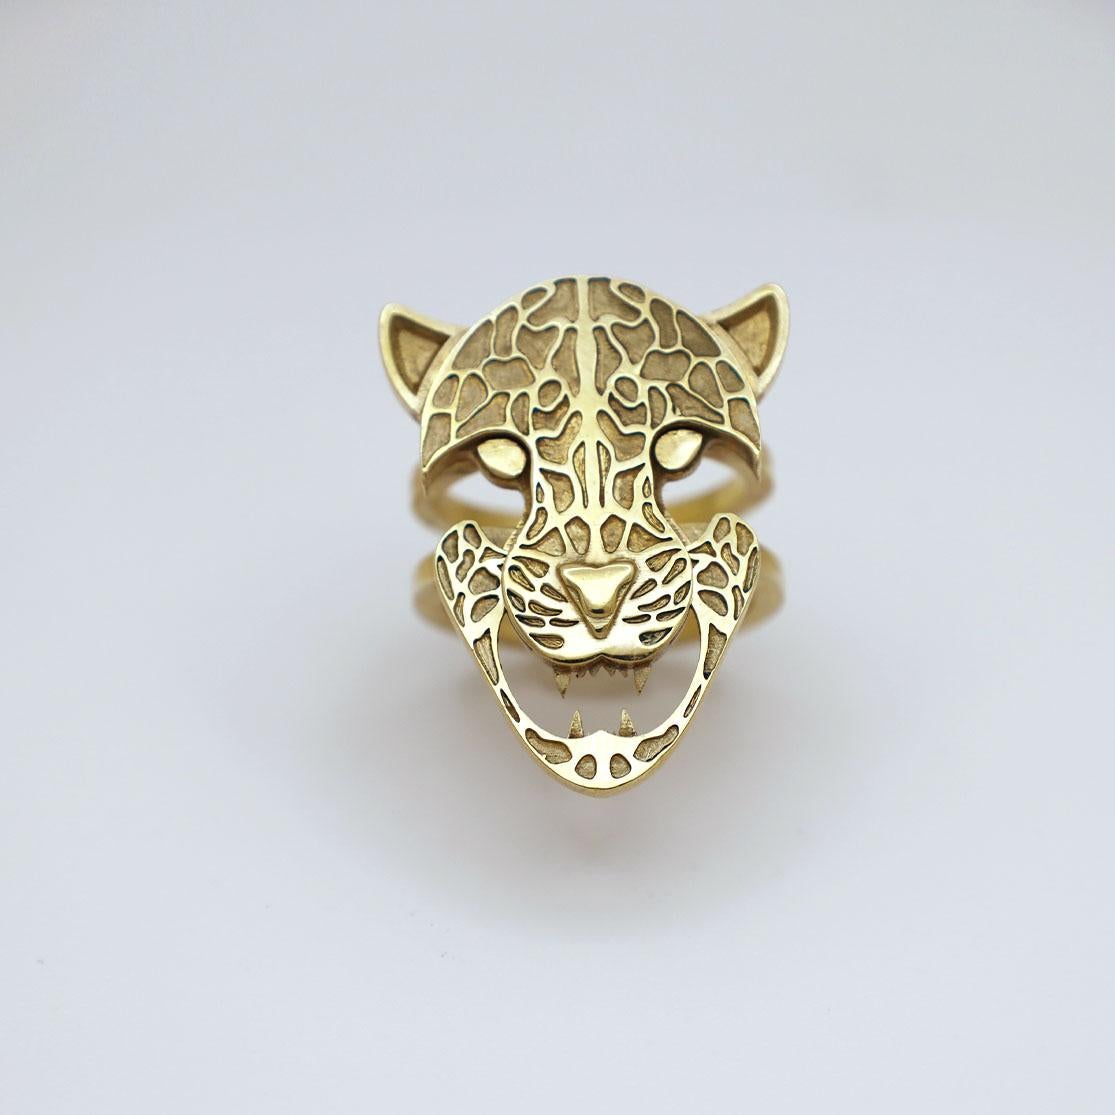 This contemporary ring reinterprets the stackable ring. Made of 10K yellow gold, the piece consists of two individual rings, which interlock to form the face of a panther. When slid apart, the panther bares its teeth, its expression changing from